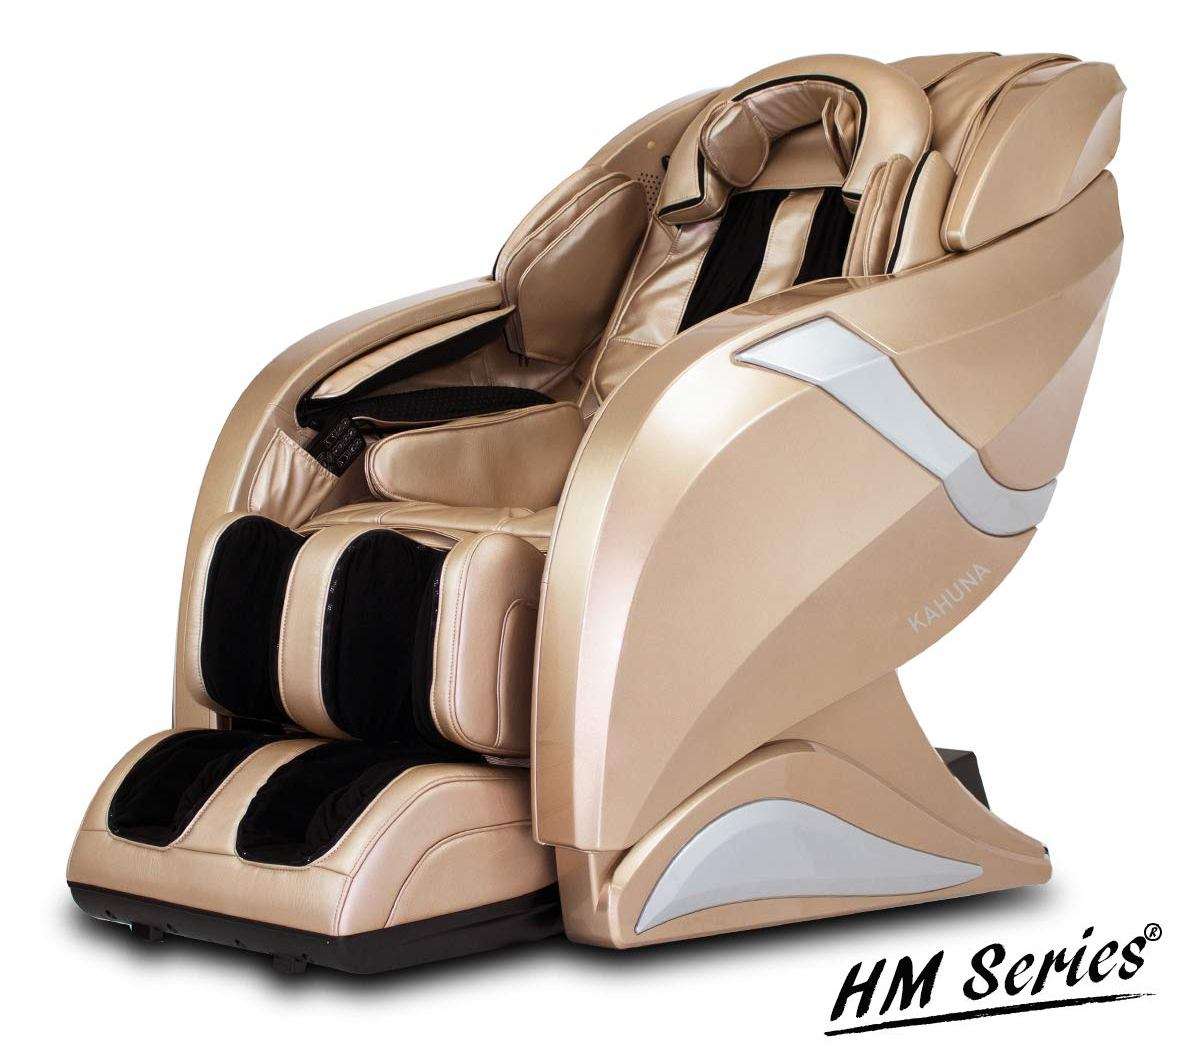 Most Expensive Massage Chair / The 8 Best Massage Chairs ...